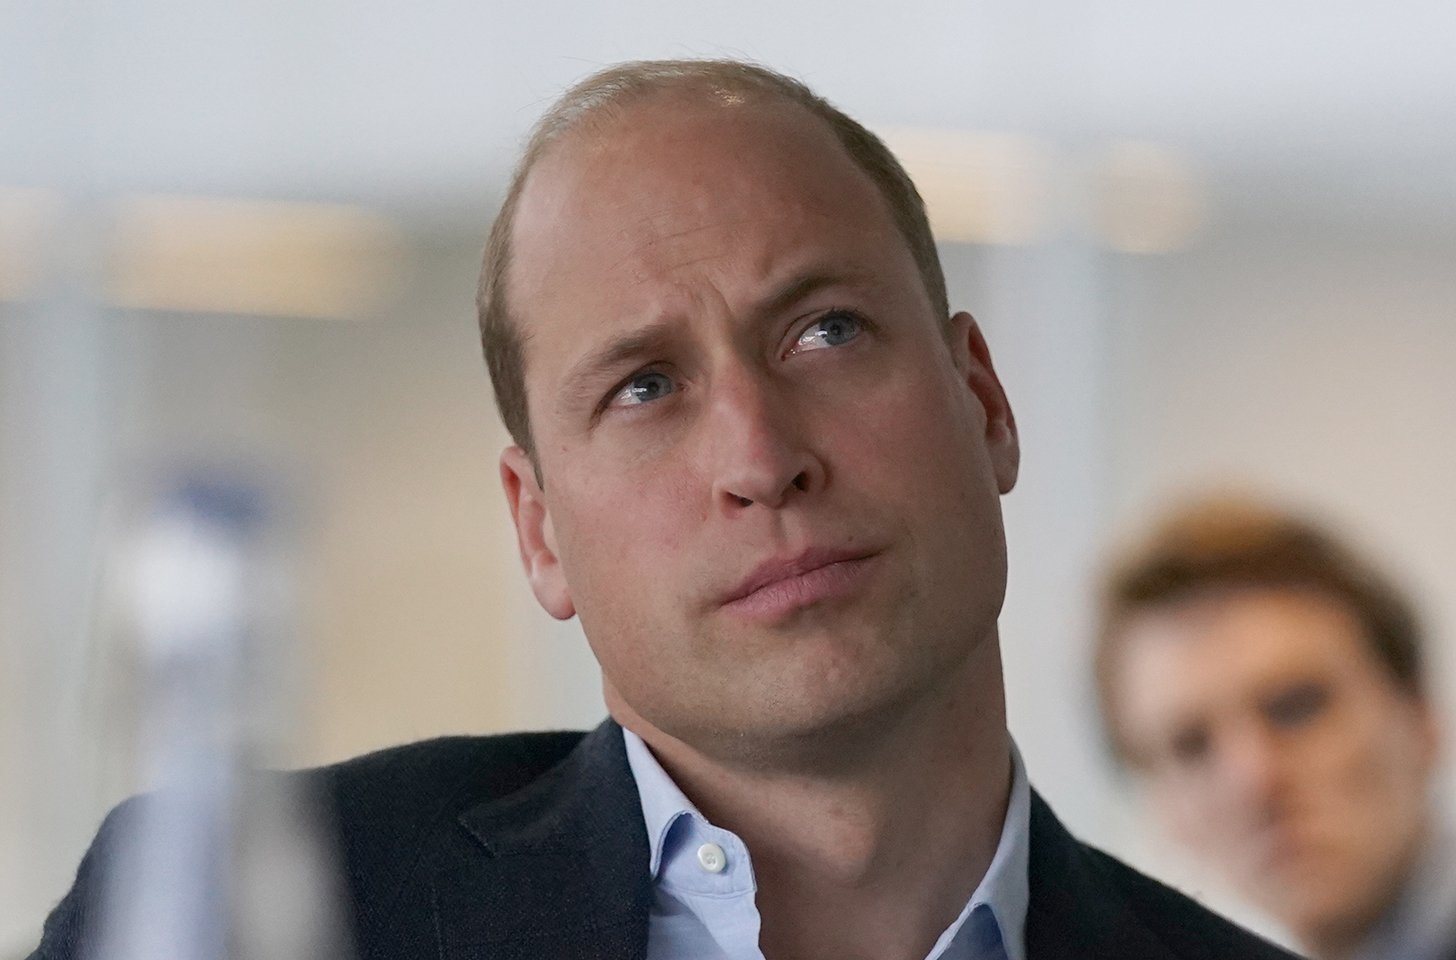 People are outraged at the casting of an actor to play Prince William